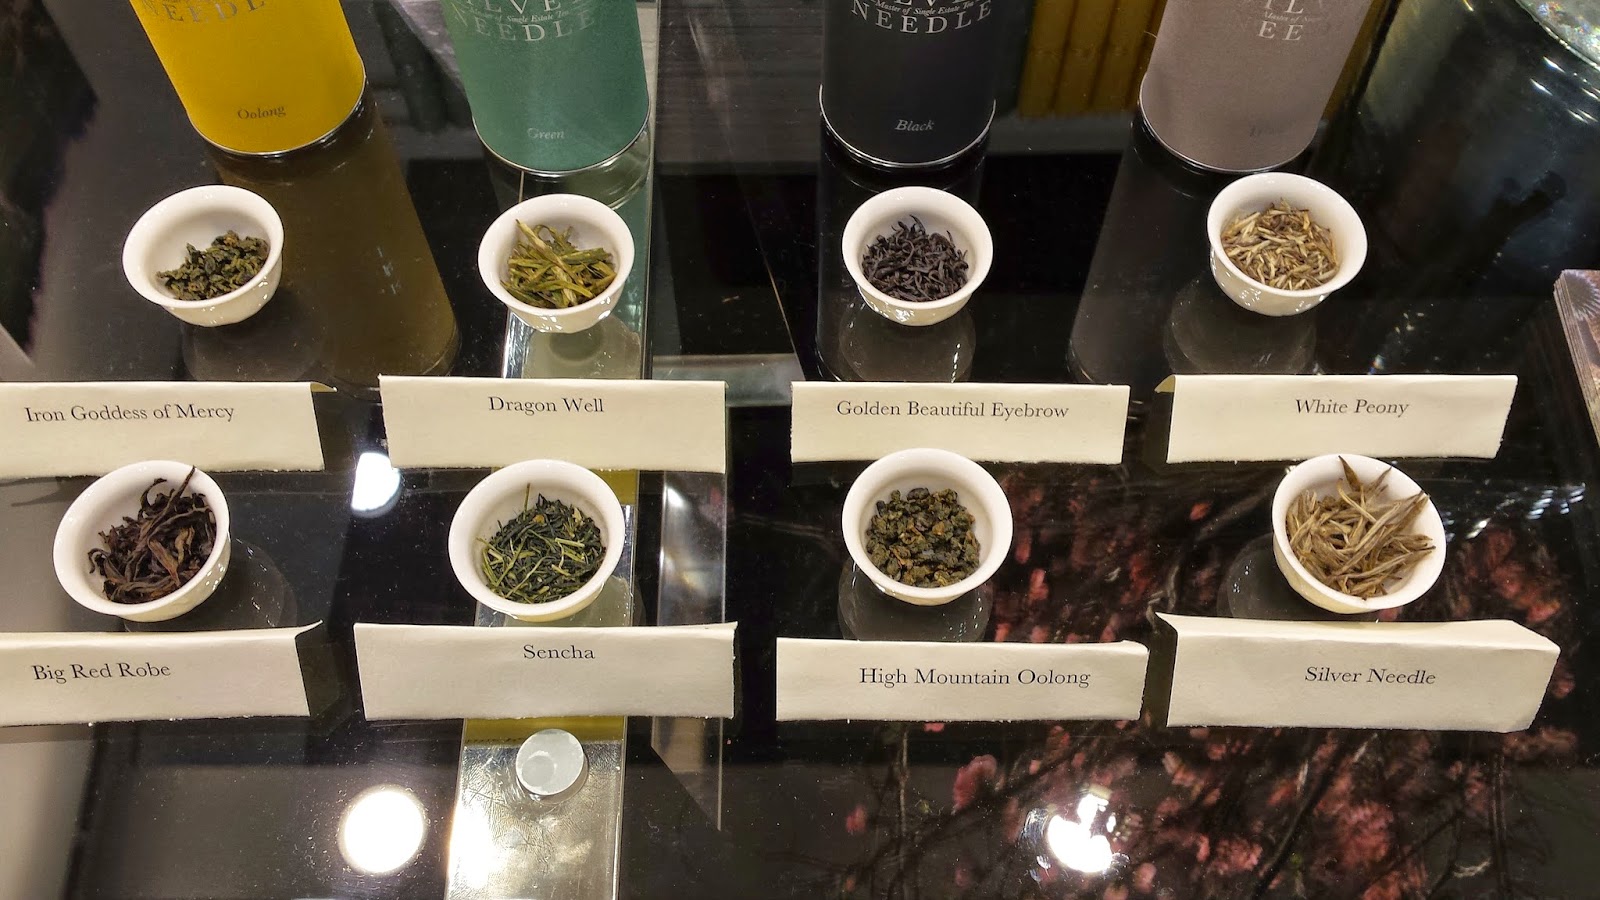 A Day at NY NOW with Silver Needle Tea Co.